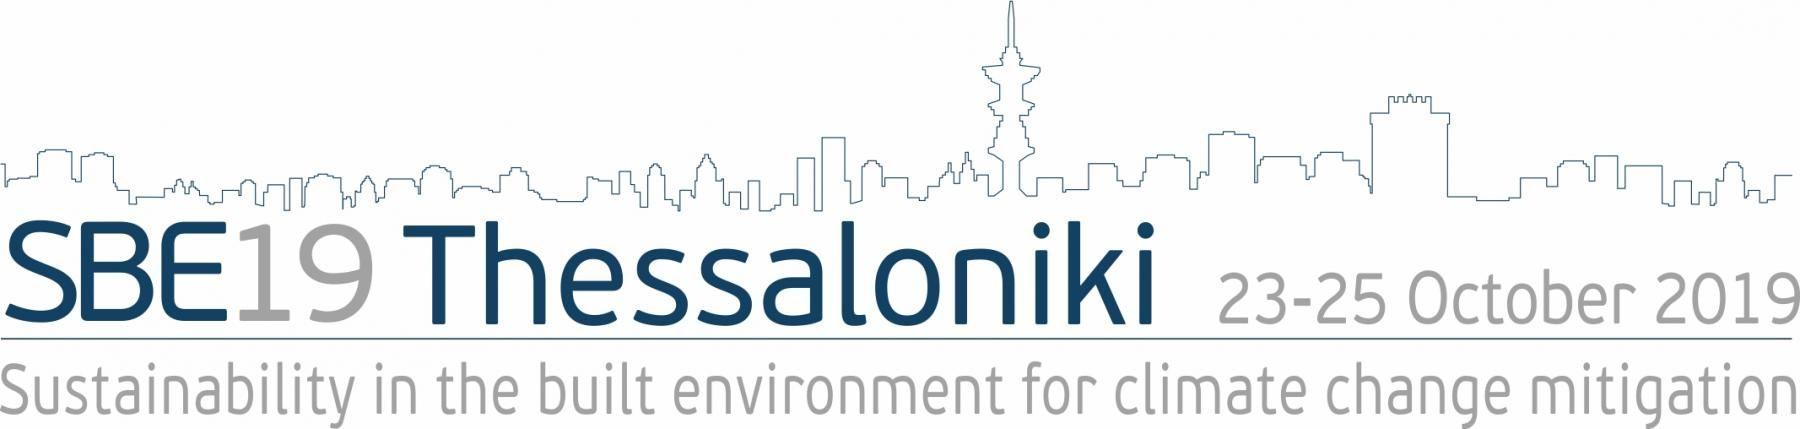 Environment Email Logo - SBE19 Thessaloniki • Sustainability in the built environment